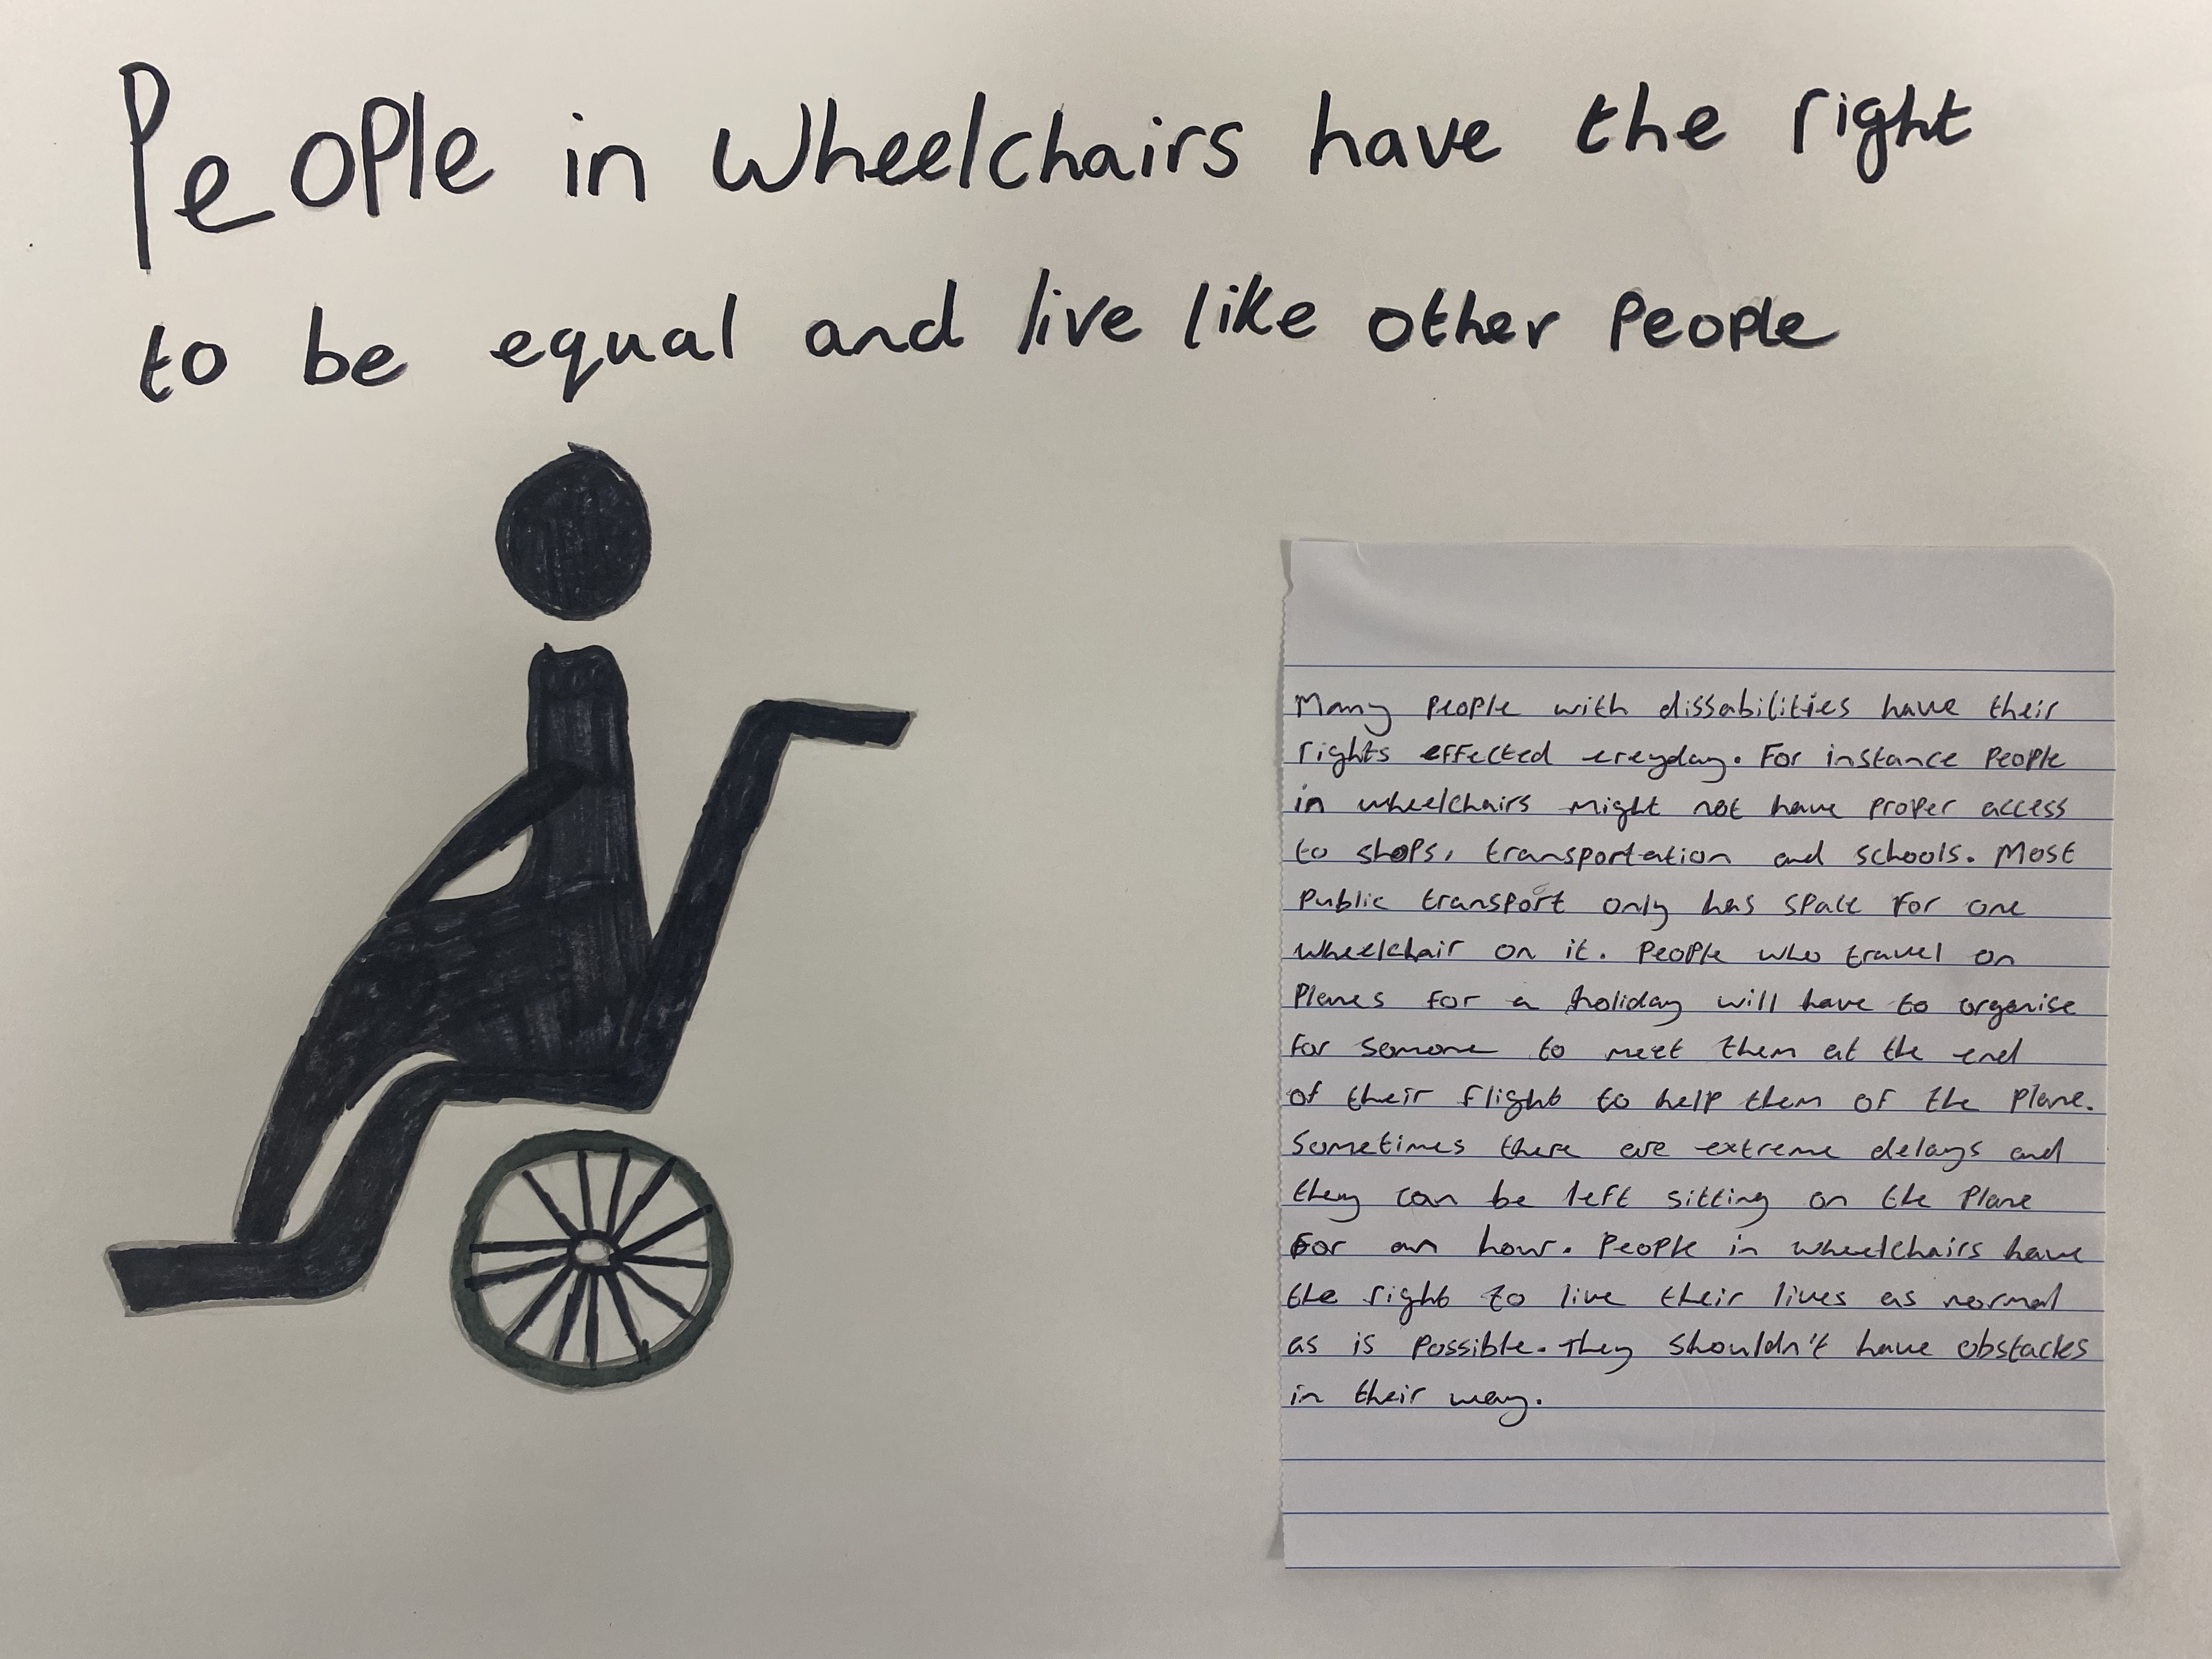 People in wheelchairs have the right to be equal and live like other people.